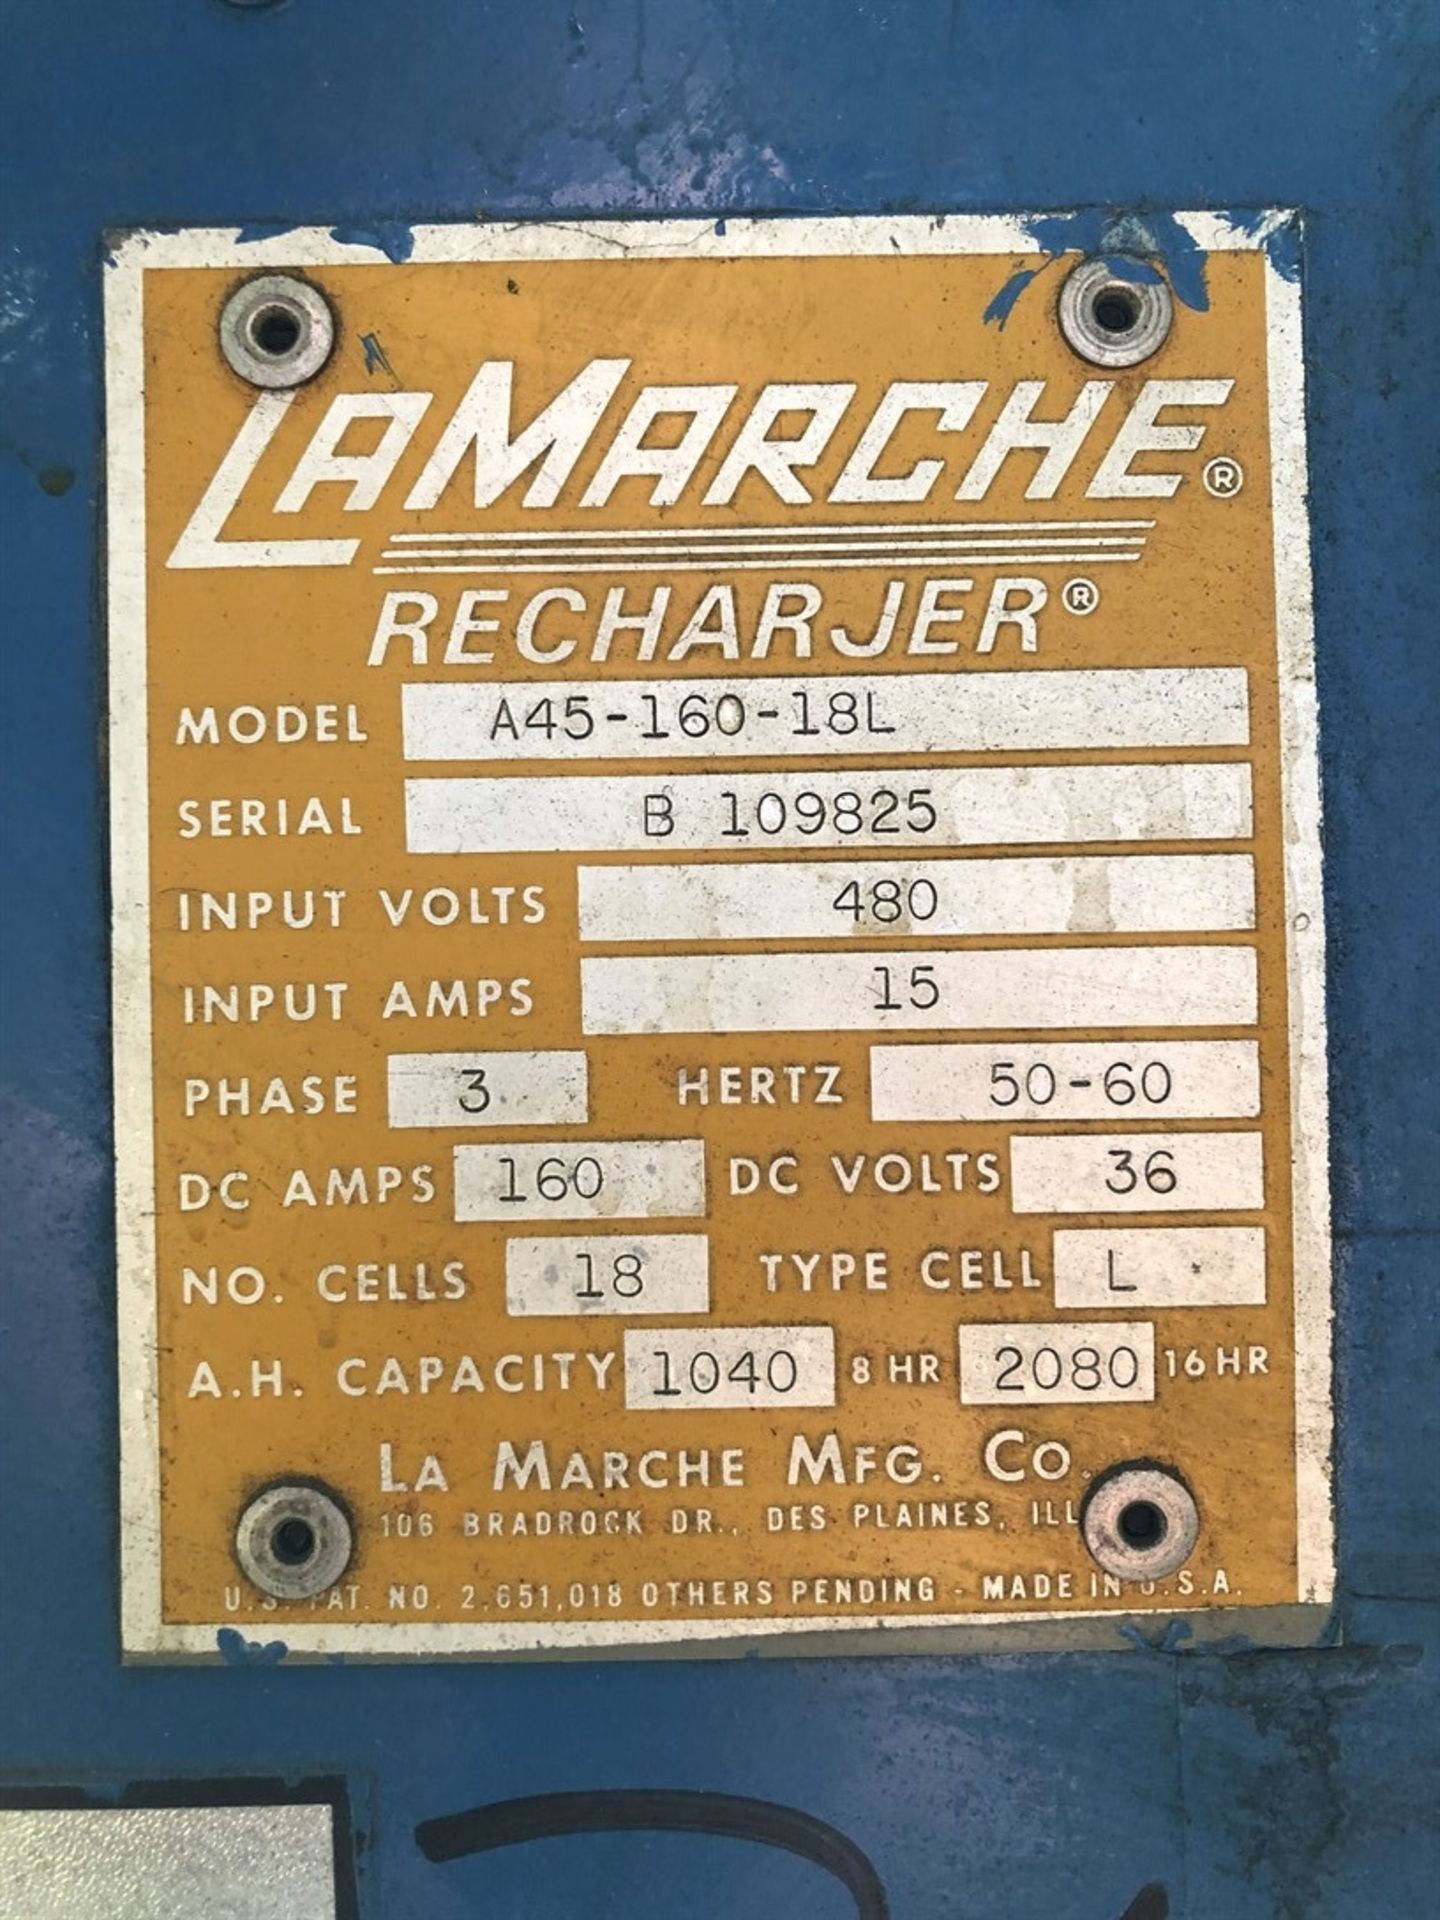 LAMARCHE RECHARJER A45-160-18L, L Type Battery Charger, s/n B 109825, (17T) - Image 2 of 2